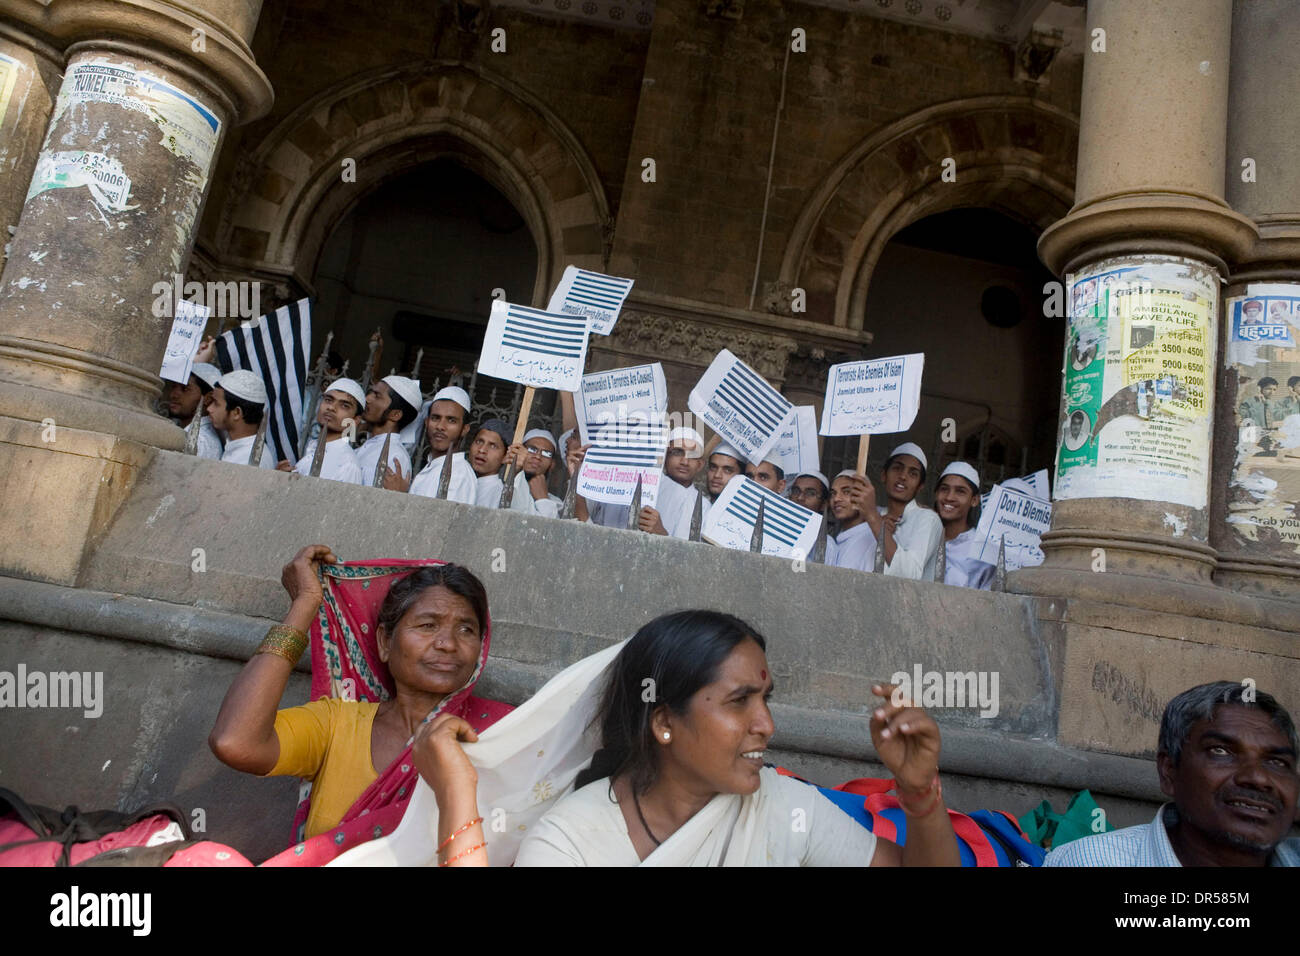 Dec 07, 2008 - Mumbai, India - Muslim organisations in Mumbai hold a peaceful rally marching from Victoria Terminus (VT) station to The Oberoi Trident hotel to demonstrate their 'oneness' with India by condemning the dastardly acts 'Muslim Terrorists'. (Credit Image: © Zishaan Akbar Latif/ZUMA Press) Stock Photo